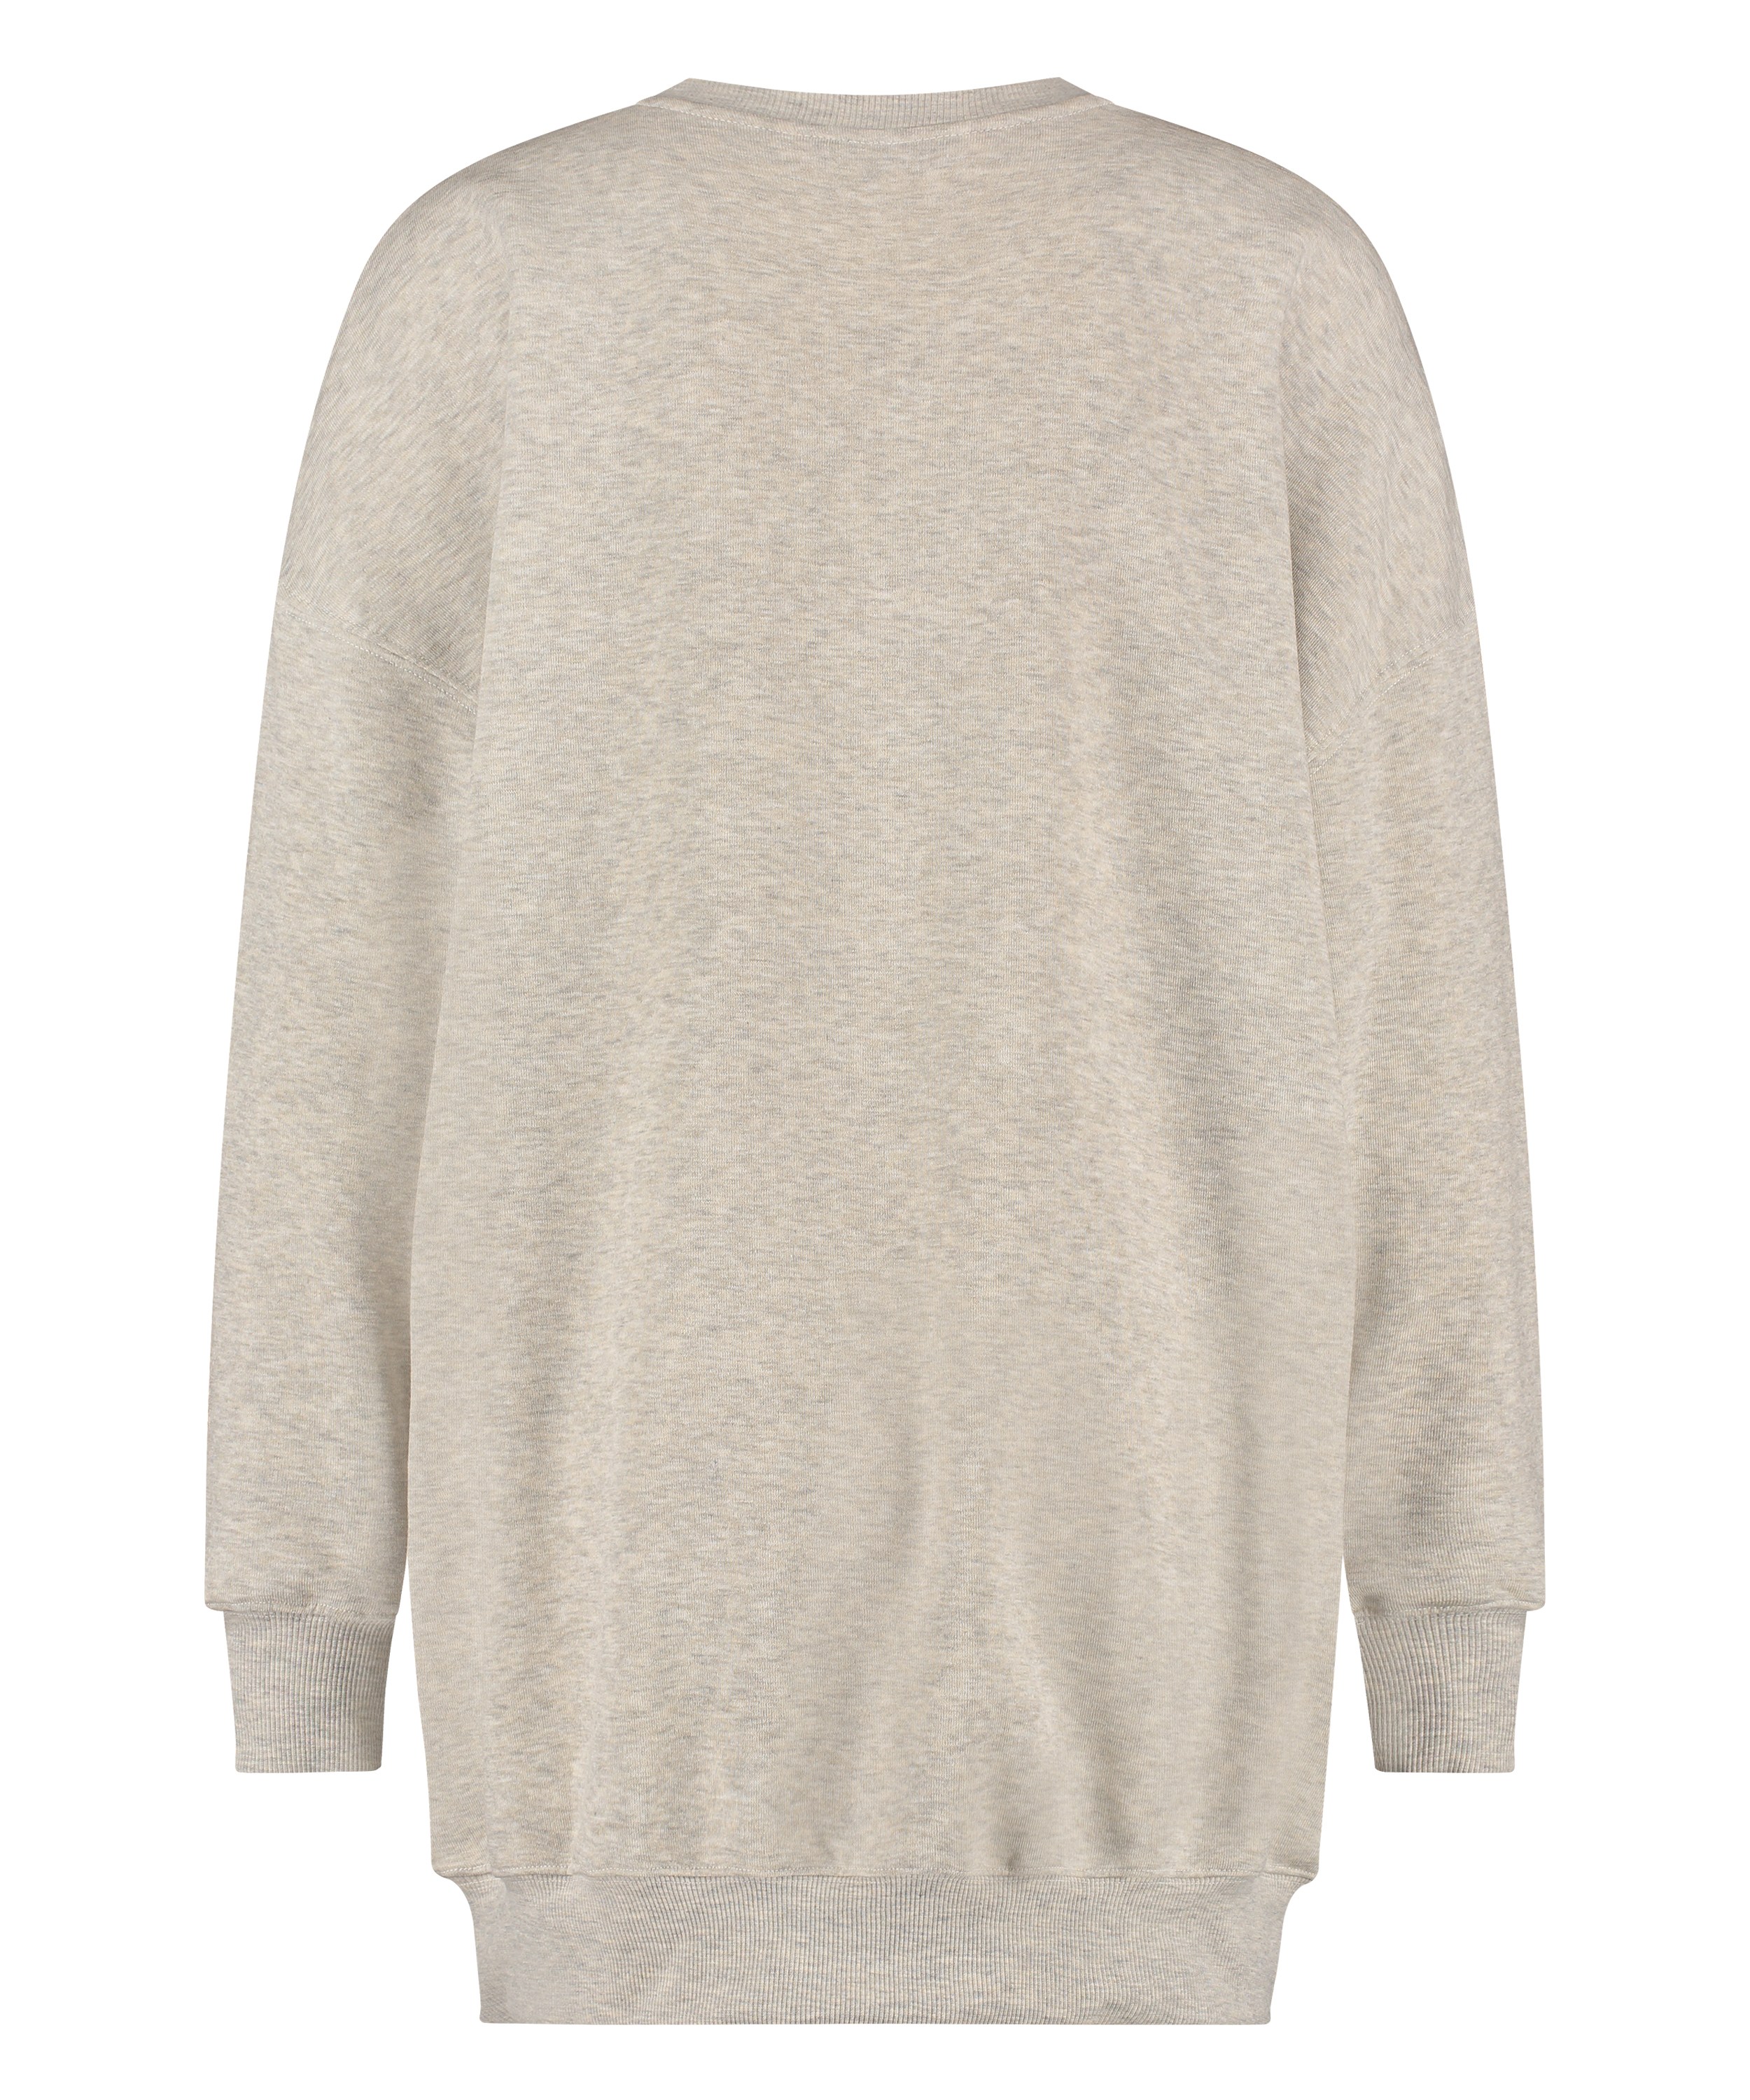 Top manches longues Sweat, Beige, main